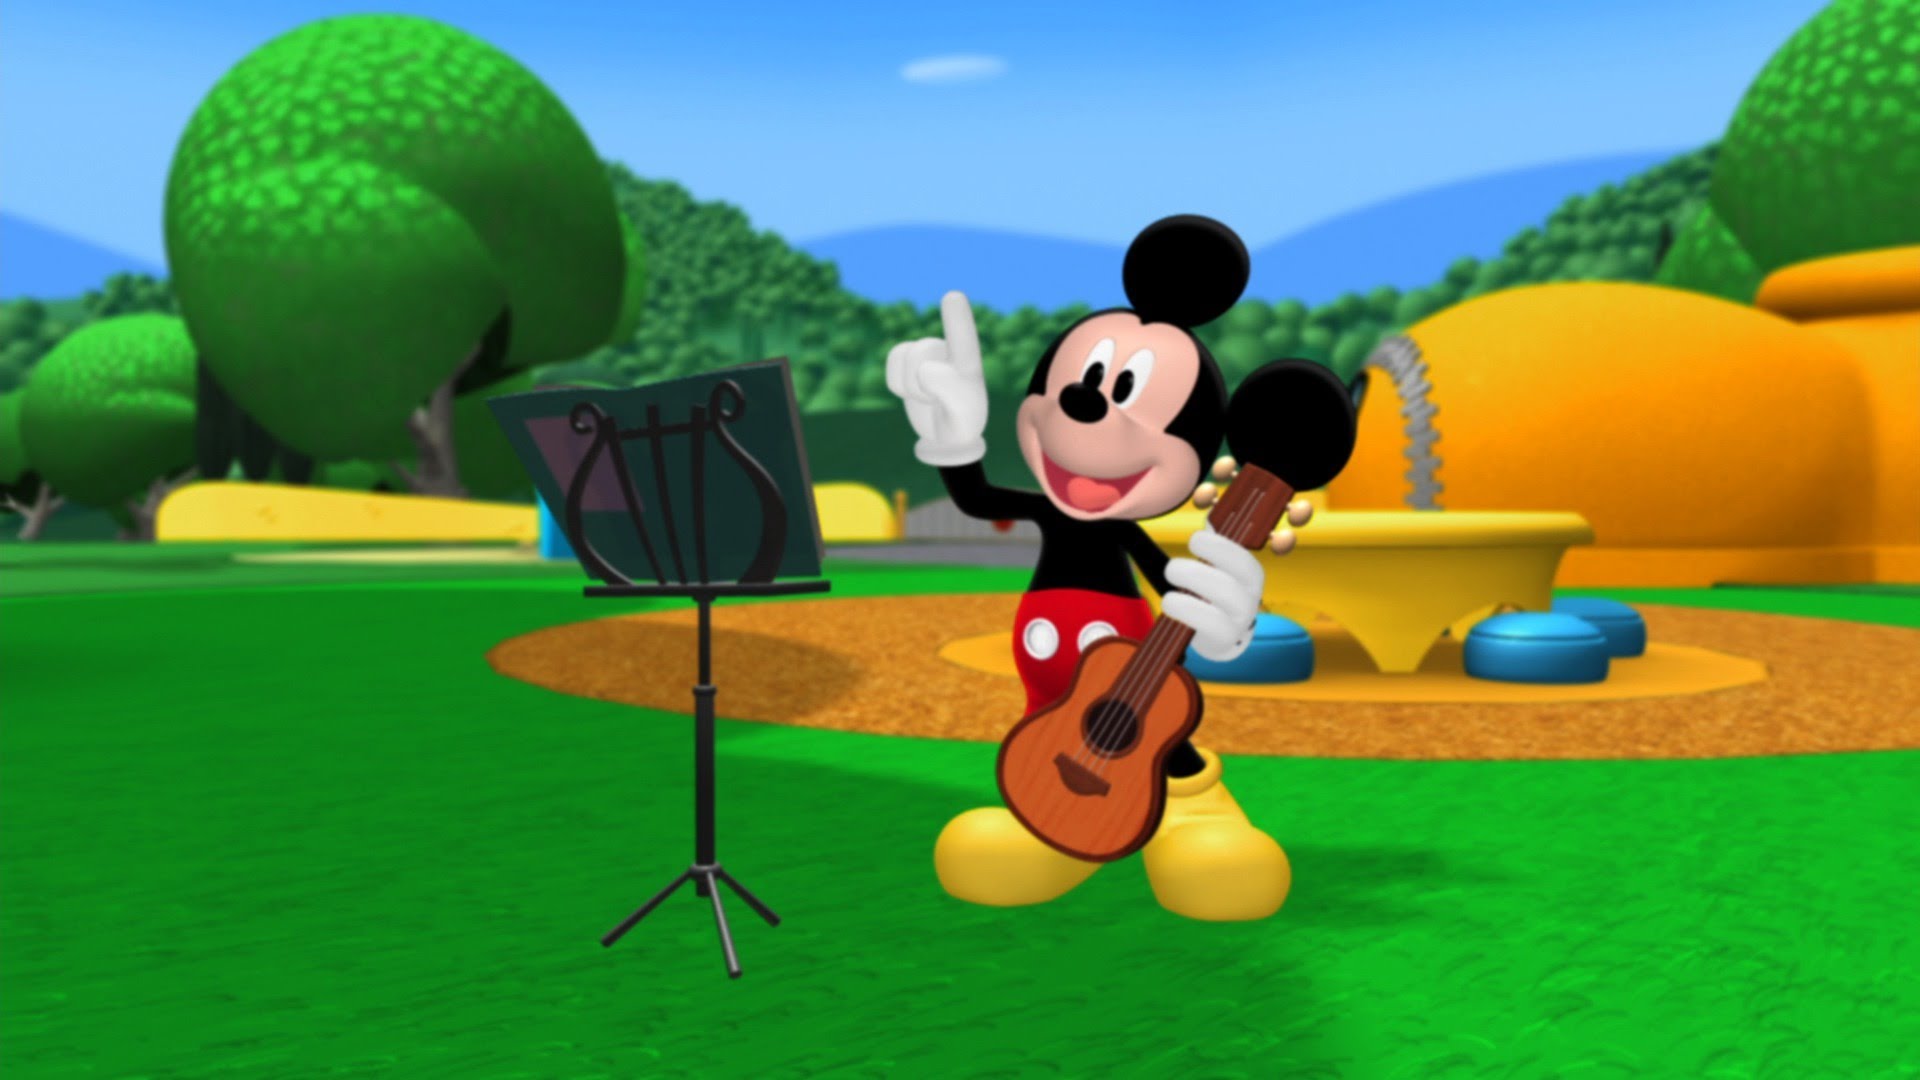 Toeval duizelig toon Mickey Mouse Live Wallpaper - 1920x1080 Wallpaper - teahub.io